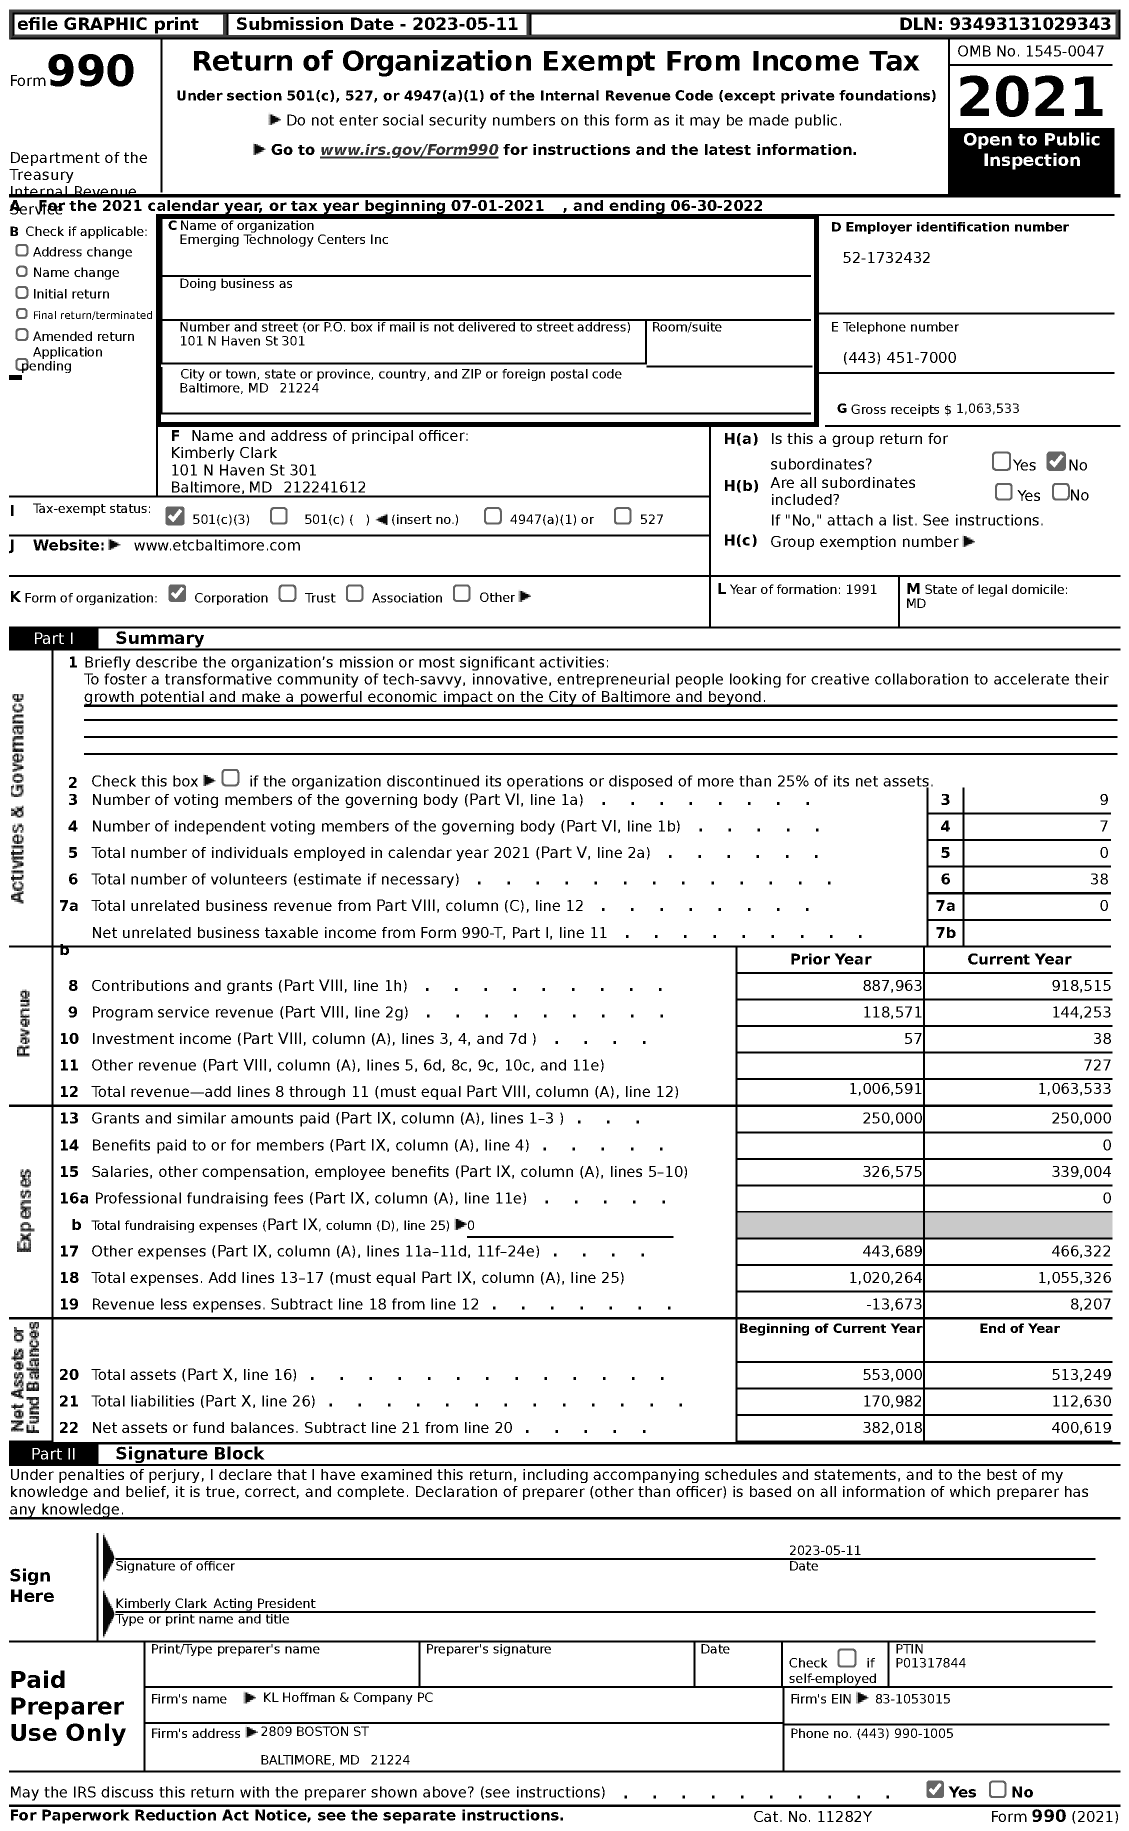 Image of first page of 2021 Form 990 for Emerging Technology Centers